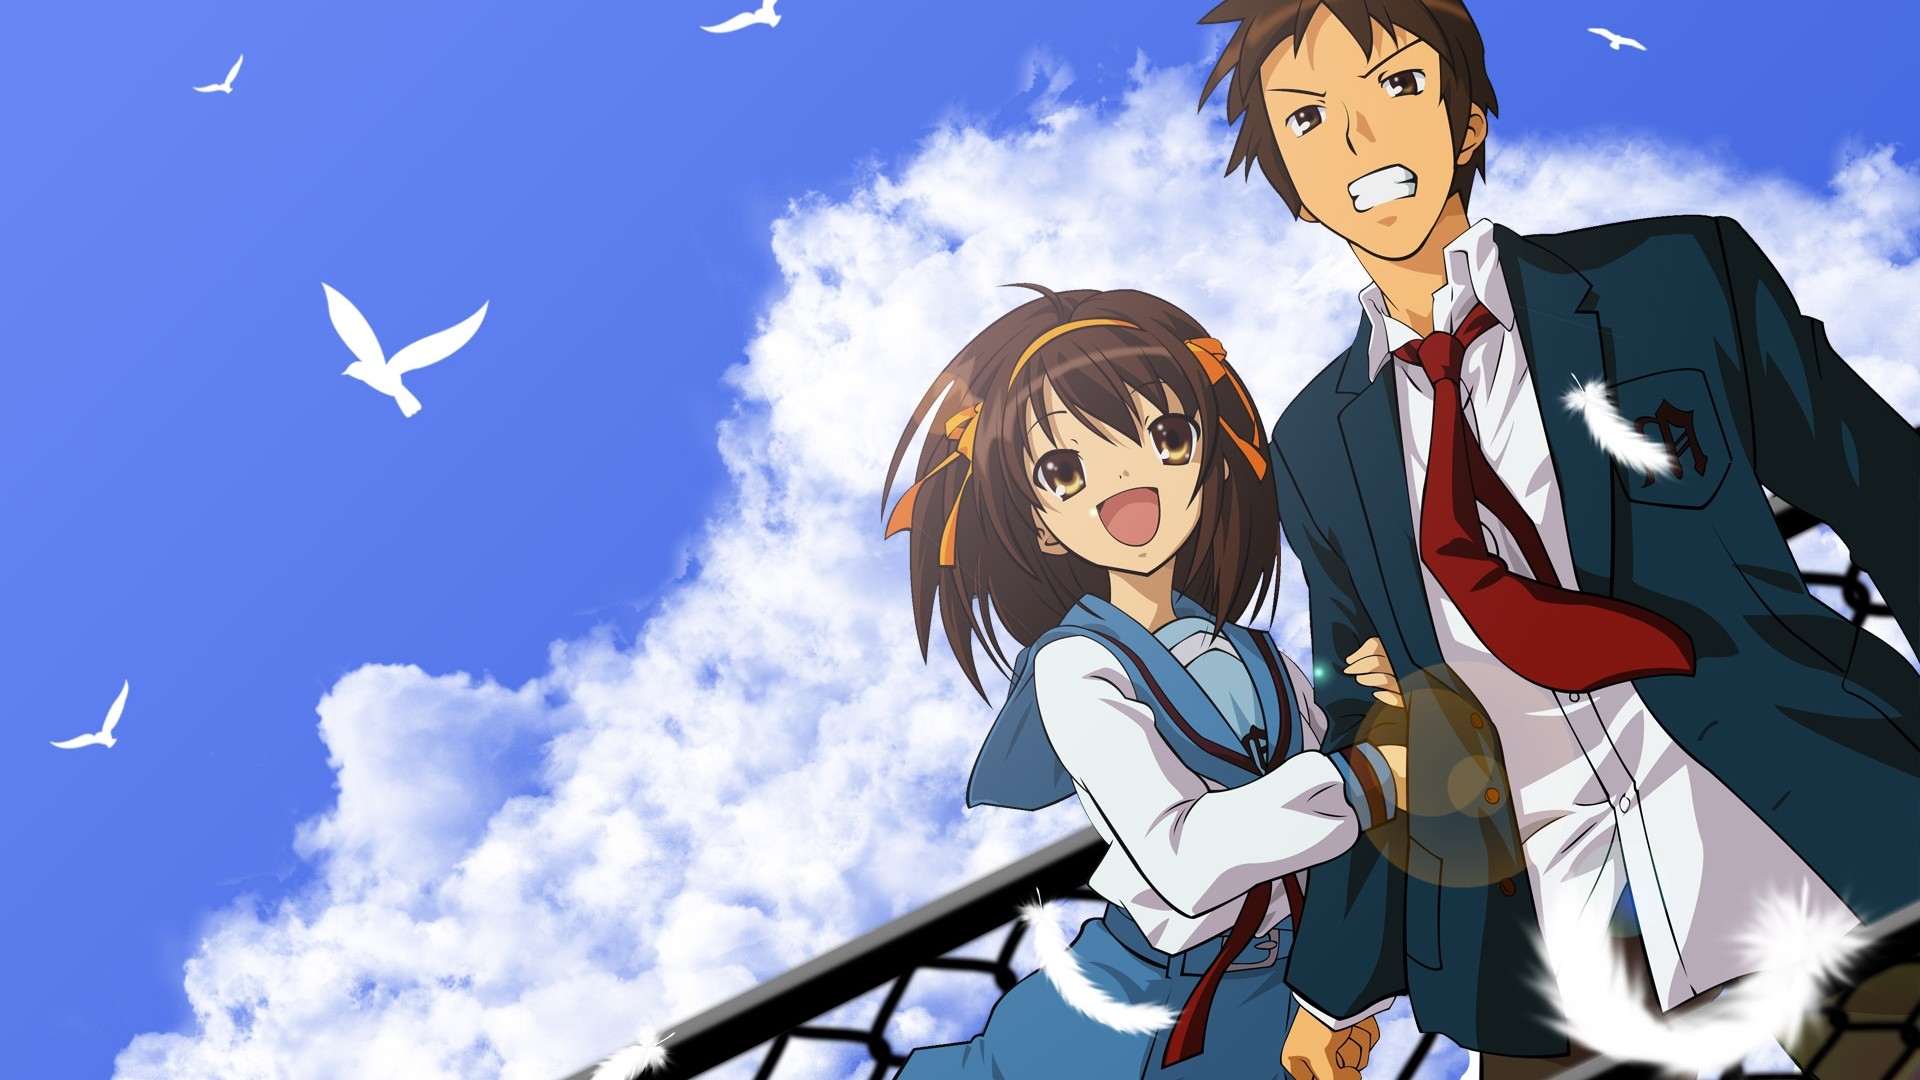 The Melancholy Of Haruhi Suzumiya Wallpapers 66 Pictures Images, Photos, Reviews